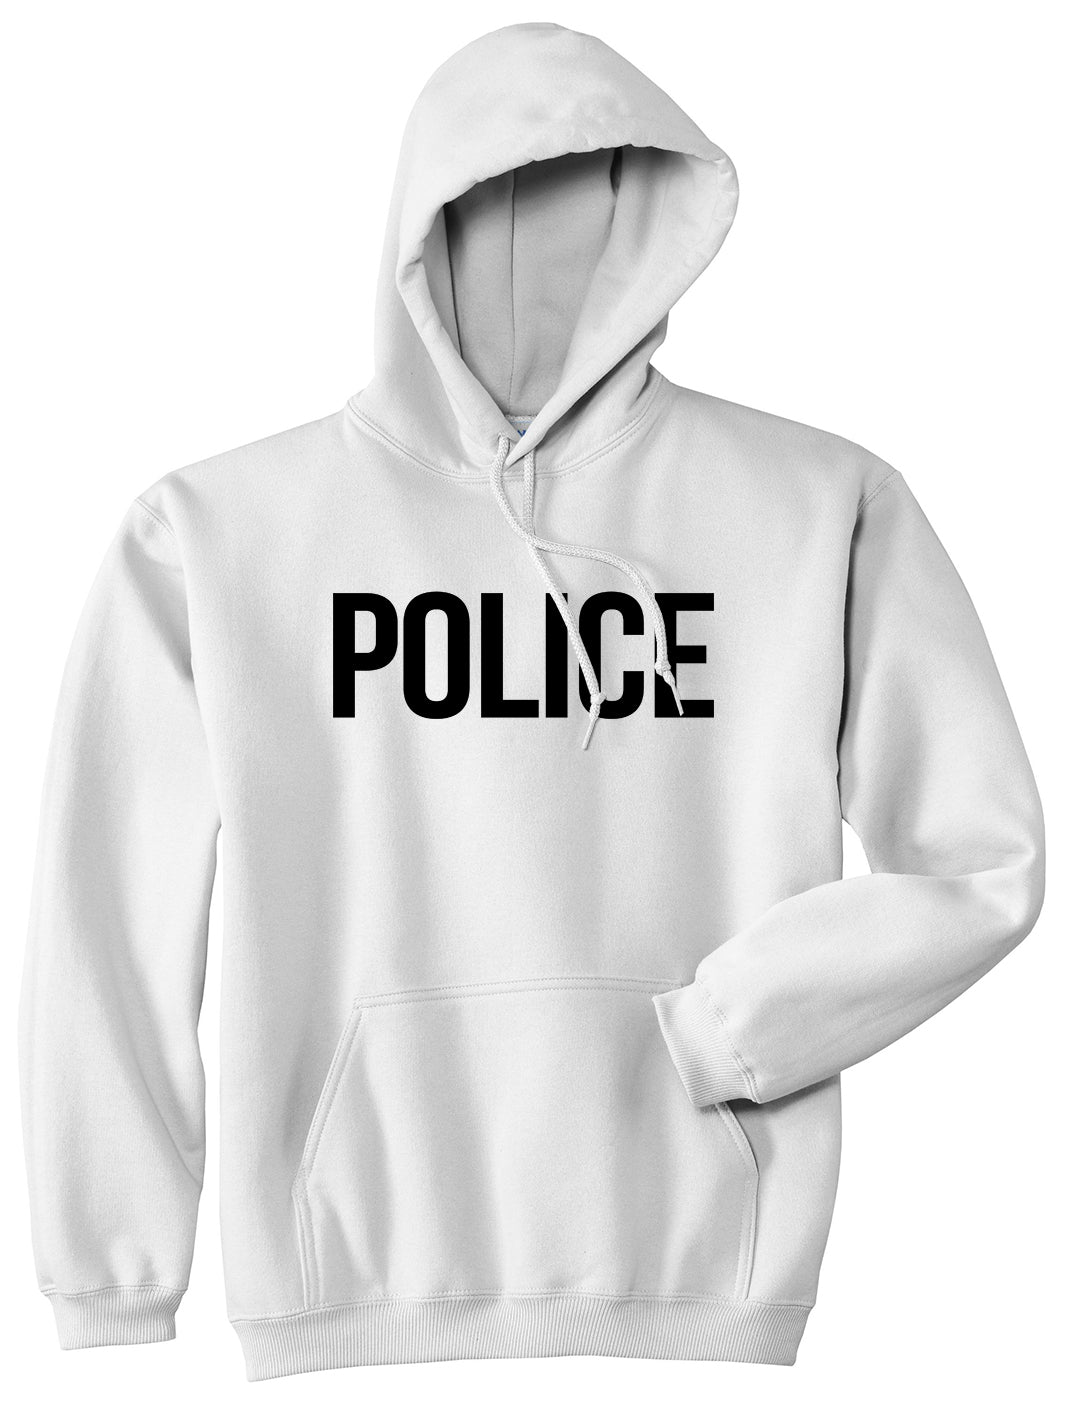 Police Uniform Cop Costume Mens Pullover Hoodie White by Kings Of NY